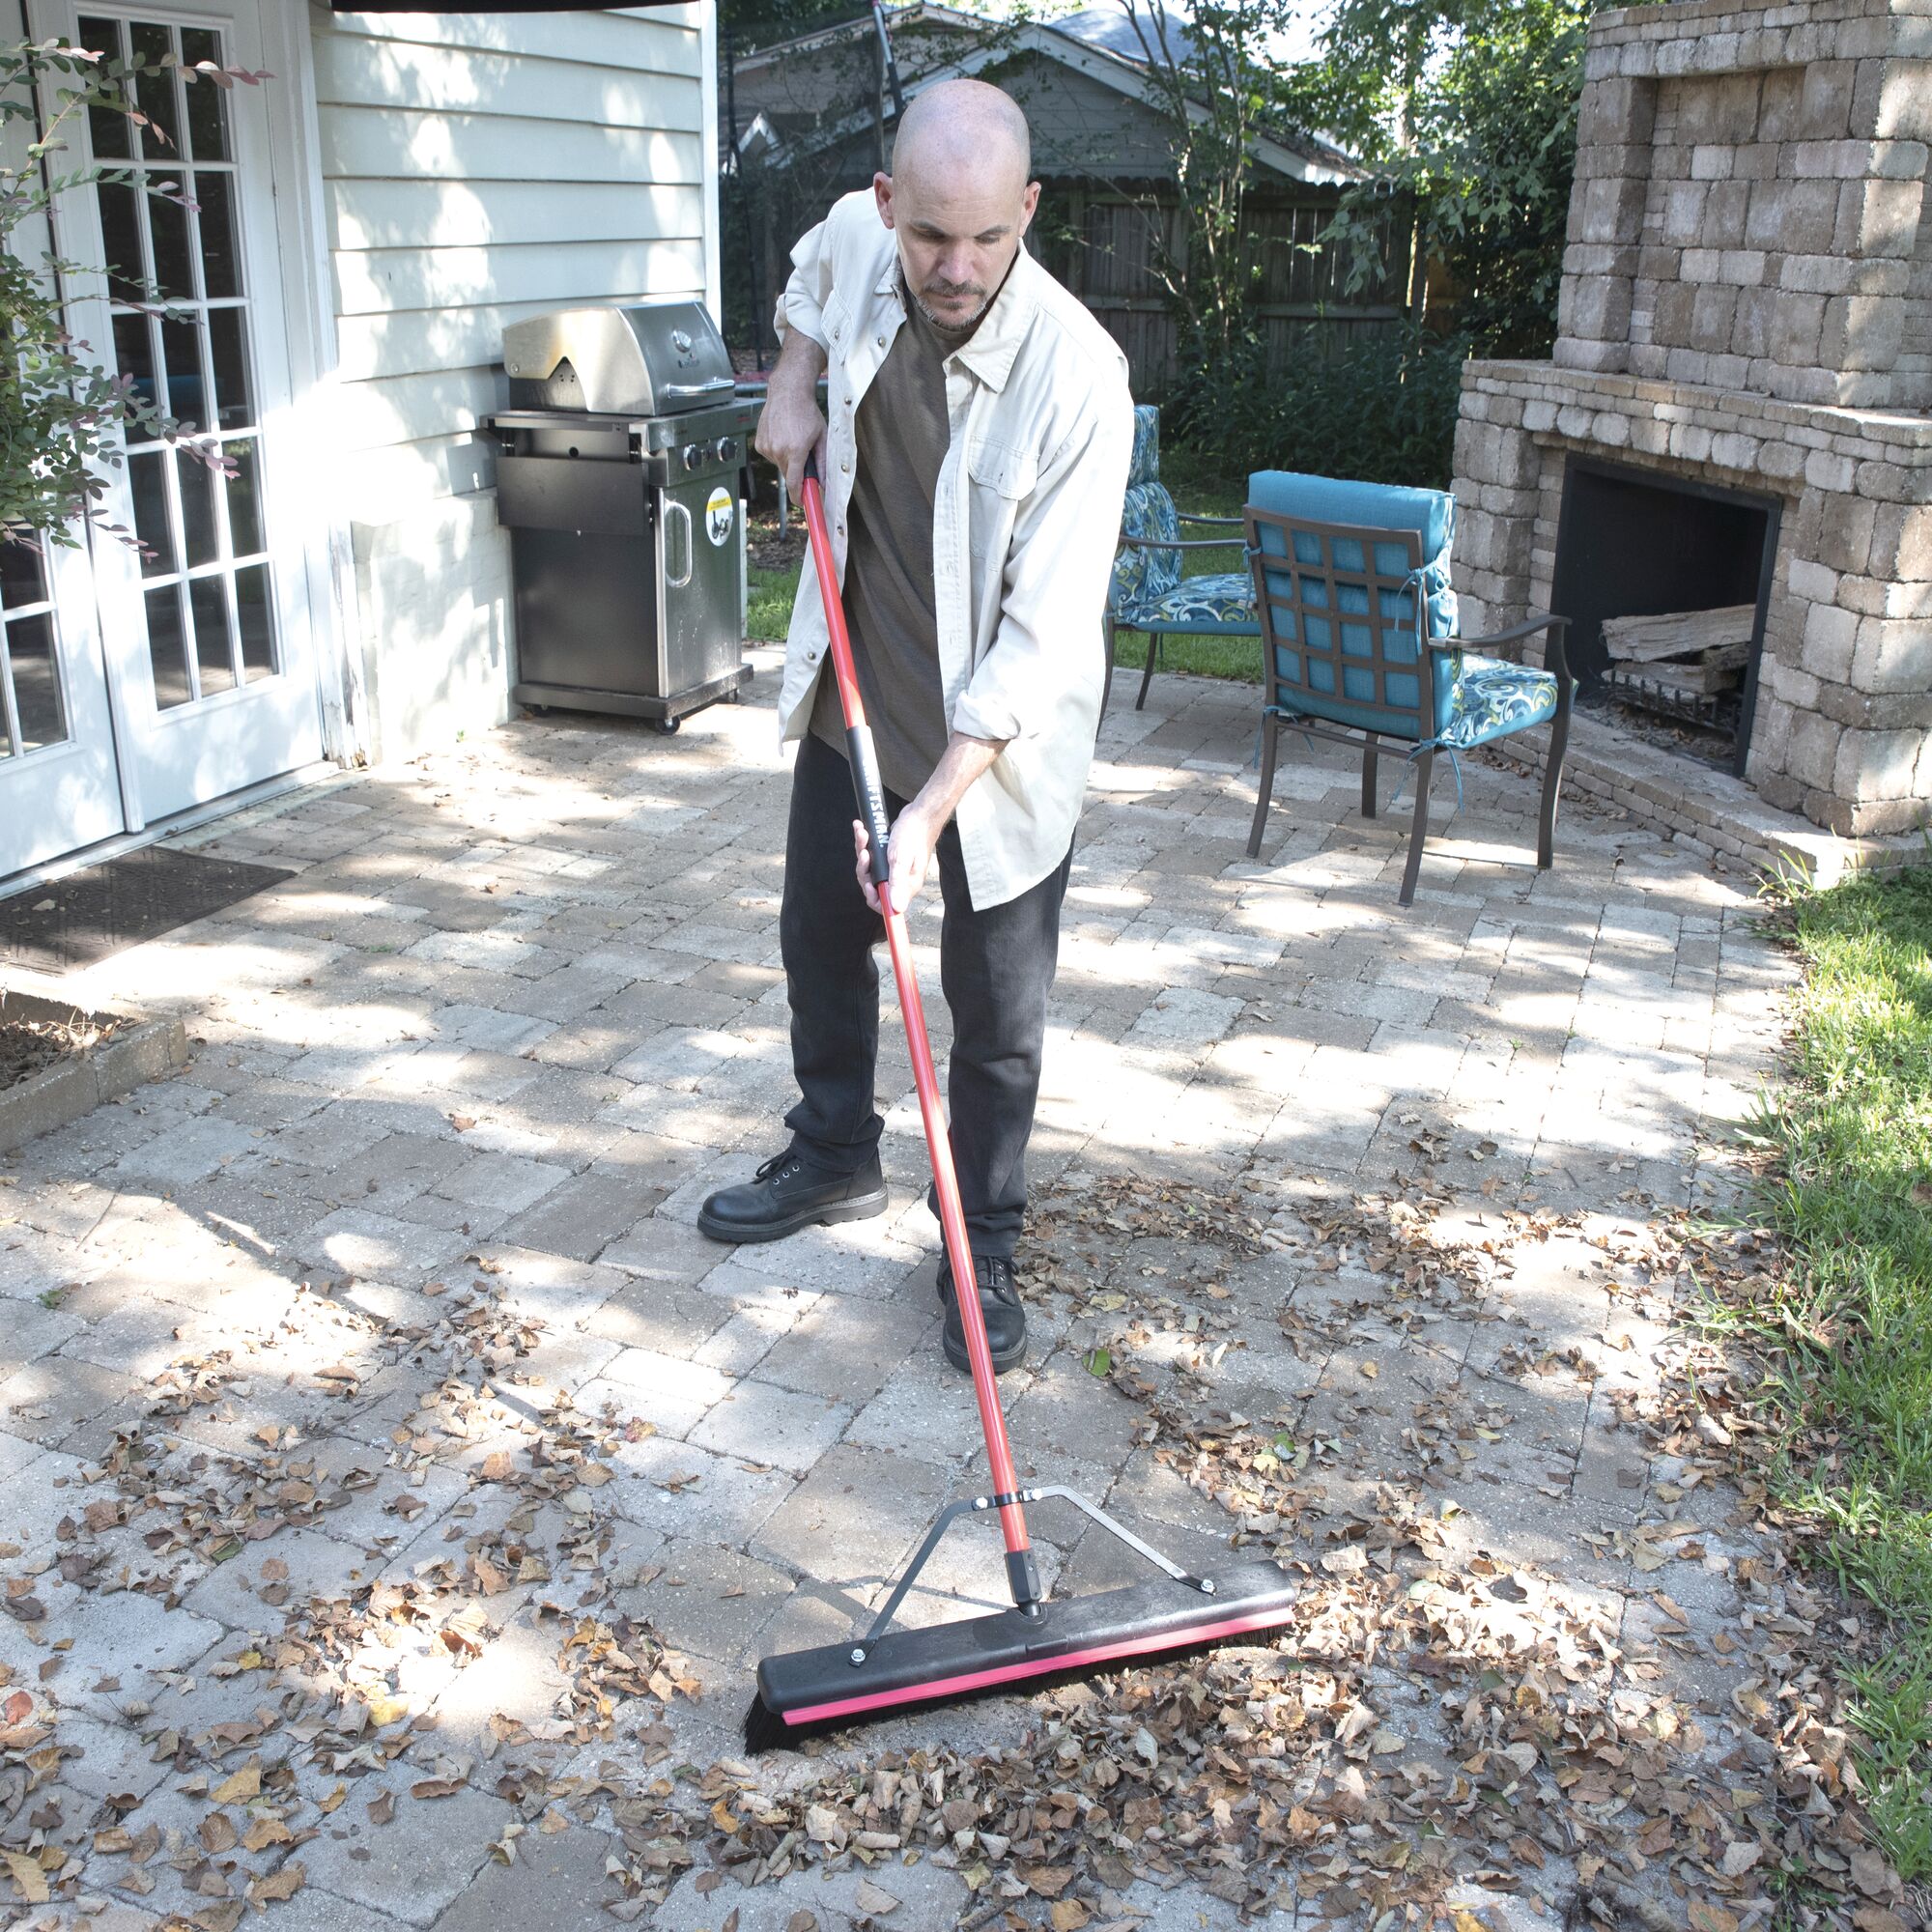 24 inch push broom with built in squeegee being used by a person to push leaves from the stone pavement.